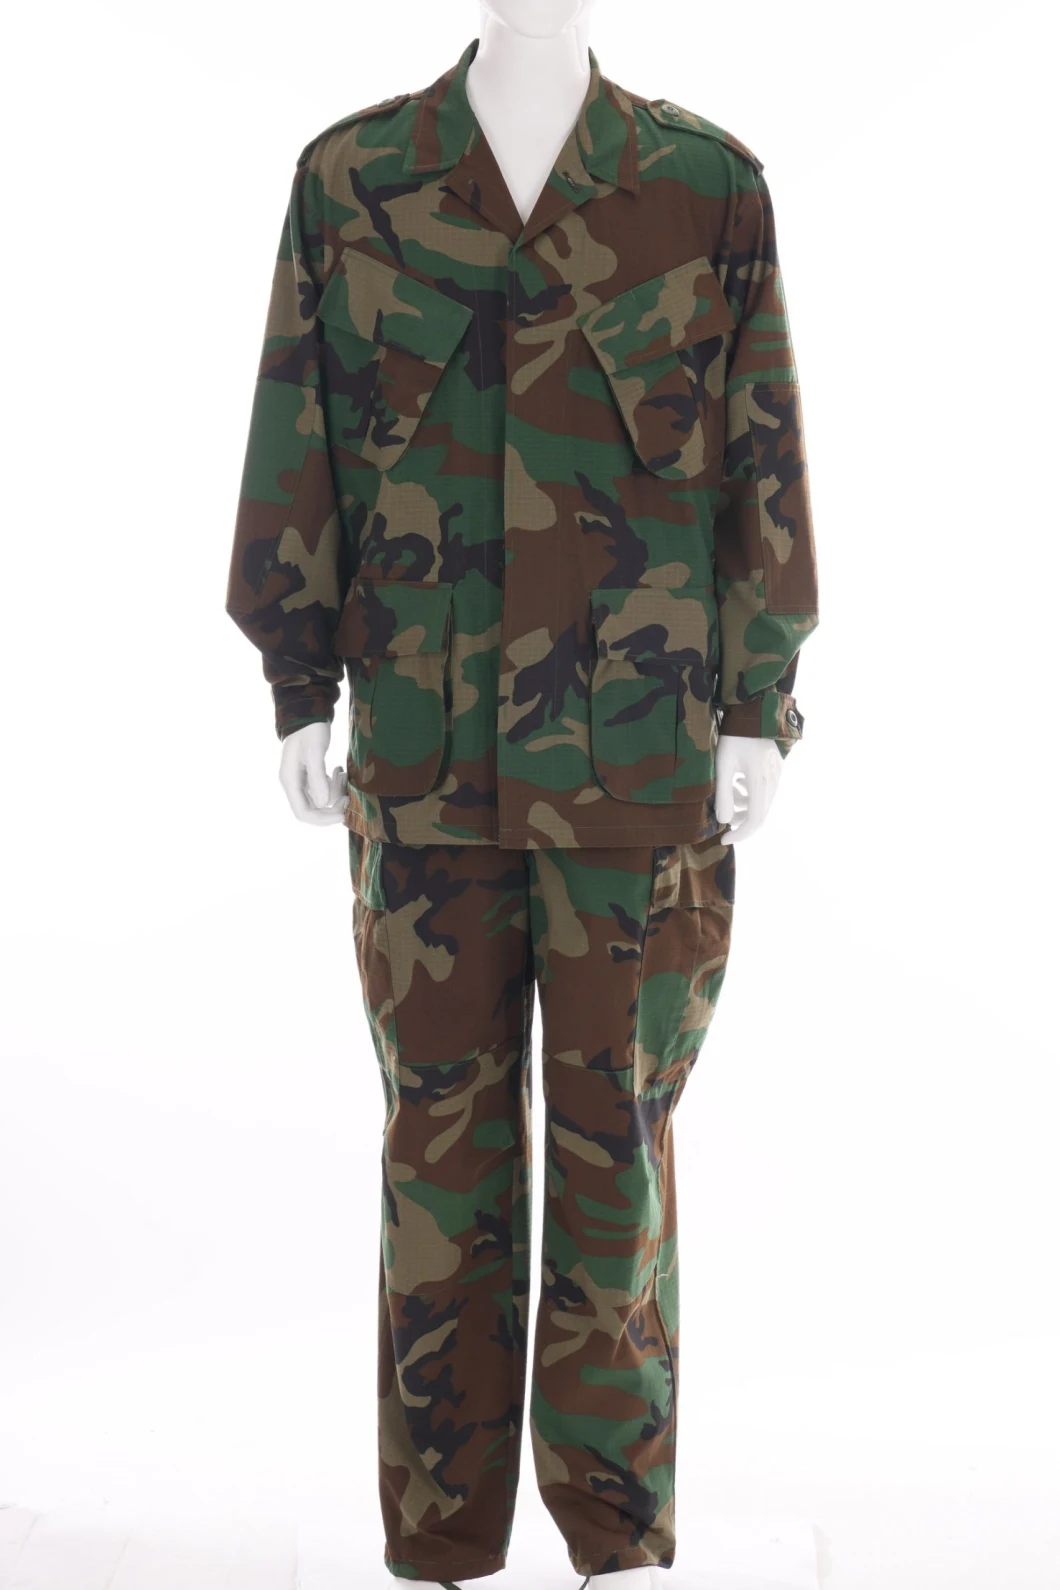 Hot Selling Camo Police Military Army Uniform /Rip-Stop Uniform /Acu Uniform/ Bdu Uniform